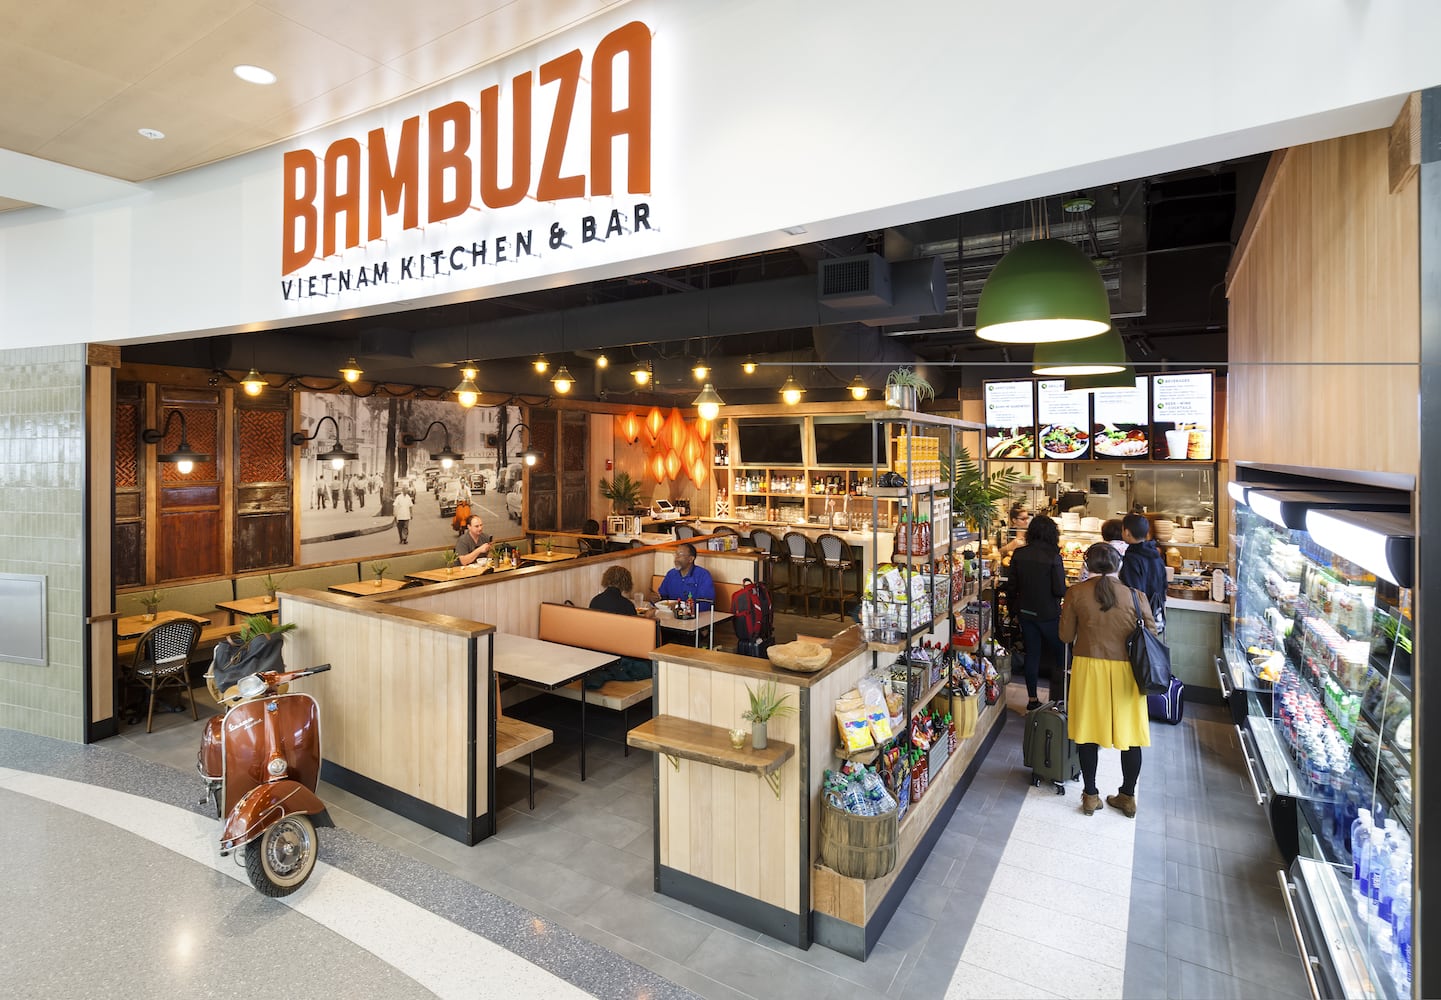 Full view of Bambuza Seatac Vietnam Kitchen and bar with guests dining and in line